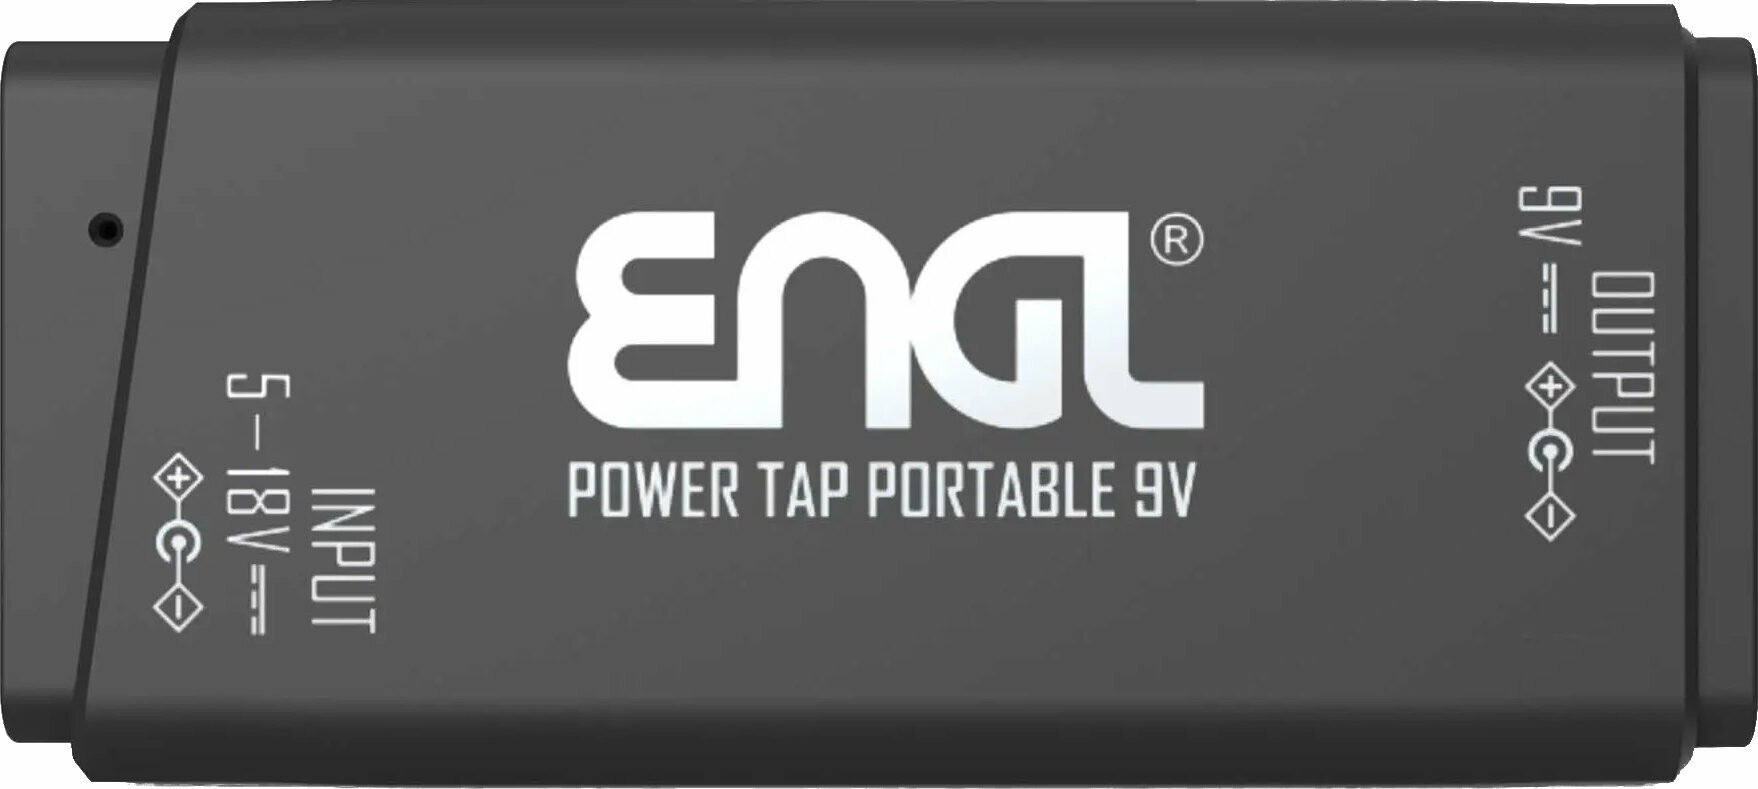 Netzteil Engl Power Tap Portable / USB to 9V